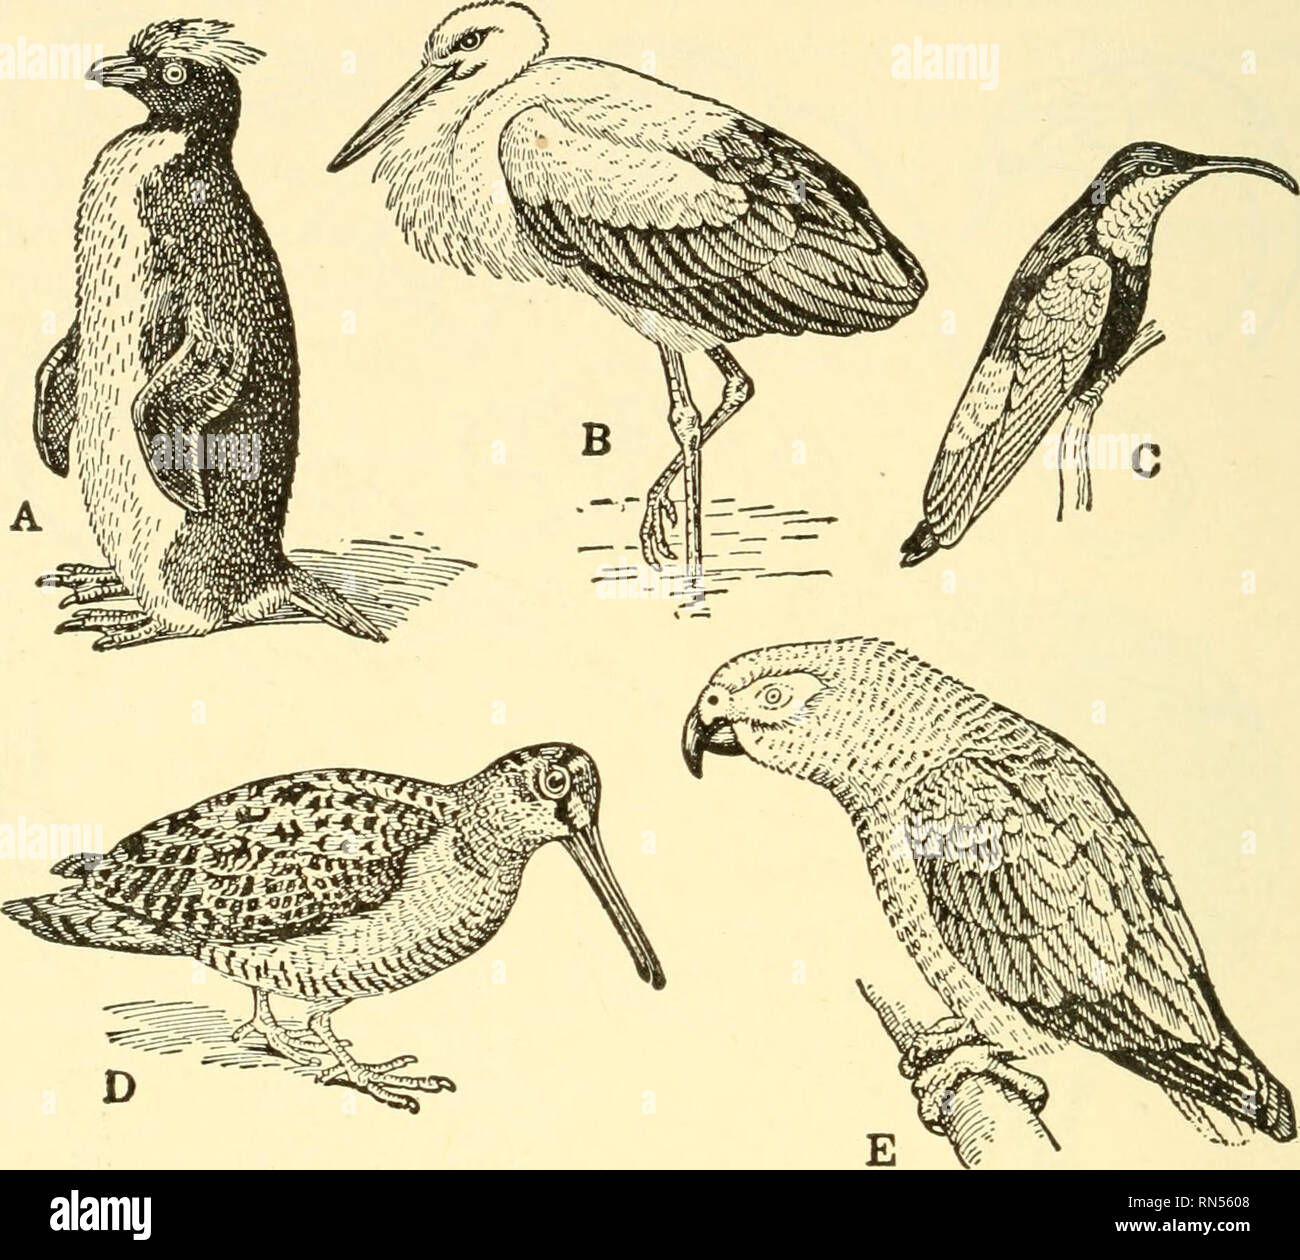 . Animal biology. Biology; Zoology; Physiology. 126 ANIMAL BIOLOGY inconceivable numbers of destructive Insects and weed seeds. (Figs. 236, 239, 266.). Fig. 86. — Carinate Birds. A, Penguin, Eudyptes chrysocoma; B, Stork, Ciconia alba; C, Hummingbird, Eulampis jugularis; D, Woodcock, Scolopax rusticula; E, Parrot, Psitlacus erithacus. (From Newman, after Lydekker and Evans.) E. Mammals With the class Mammalia we reach the highest forms of life on the Earth, culminating in Man, so here naturally our interest is chiefly focussed. But since considerable attention is to be given a little later to  Stock Photo